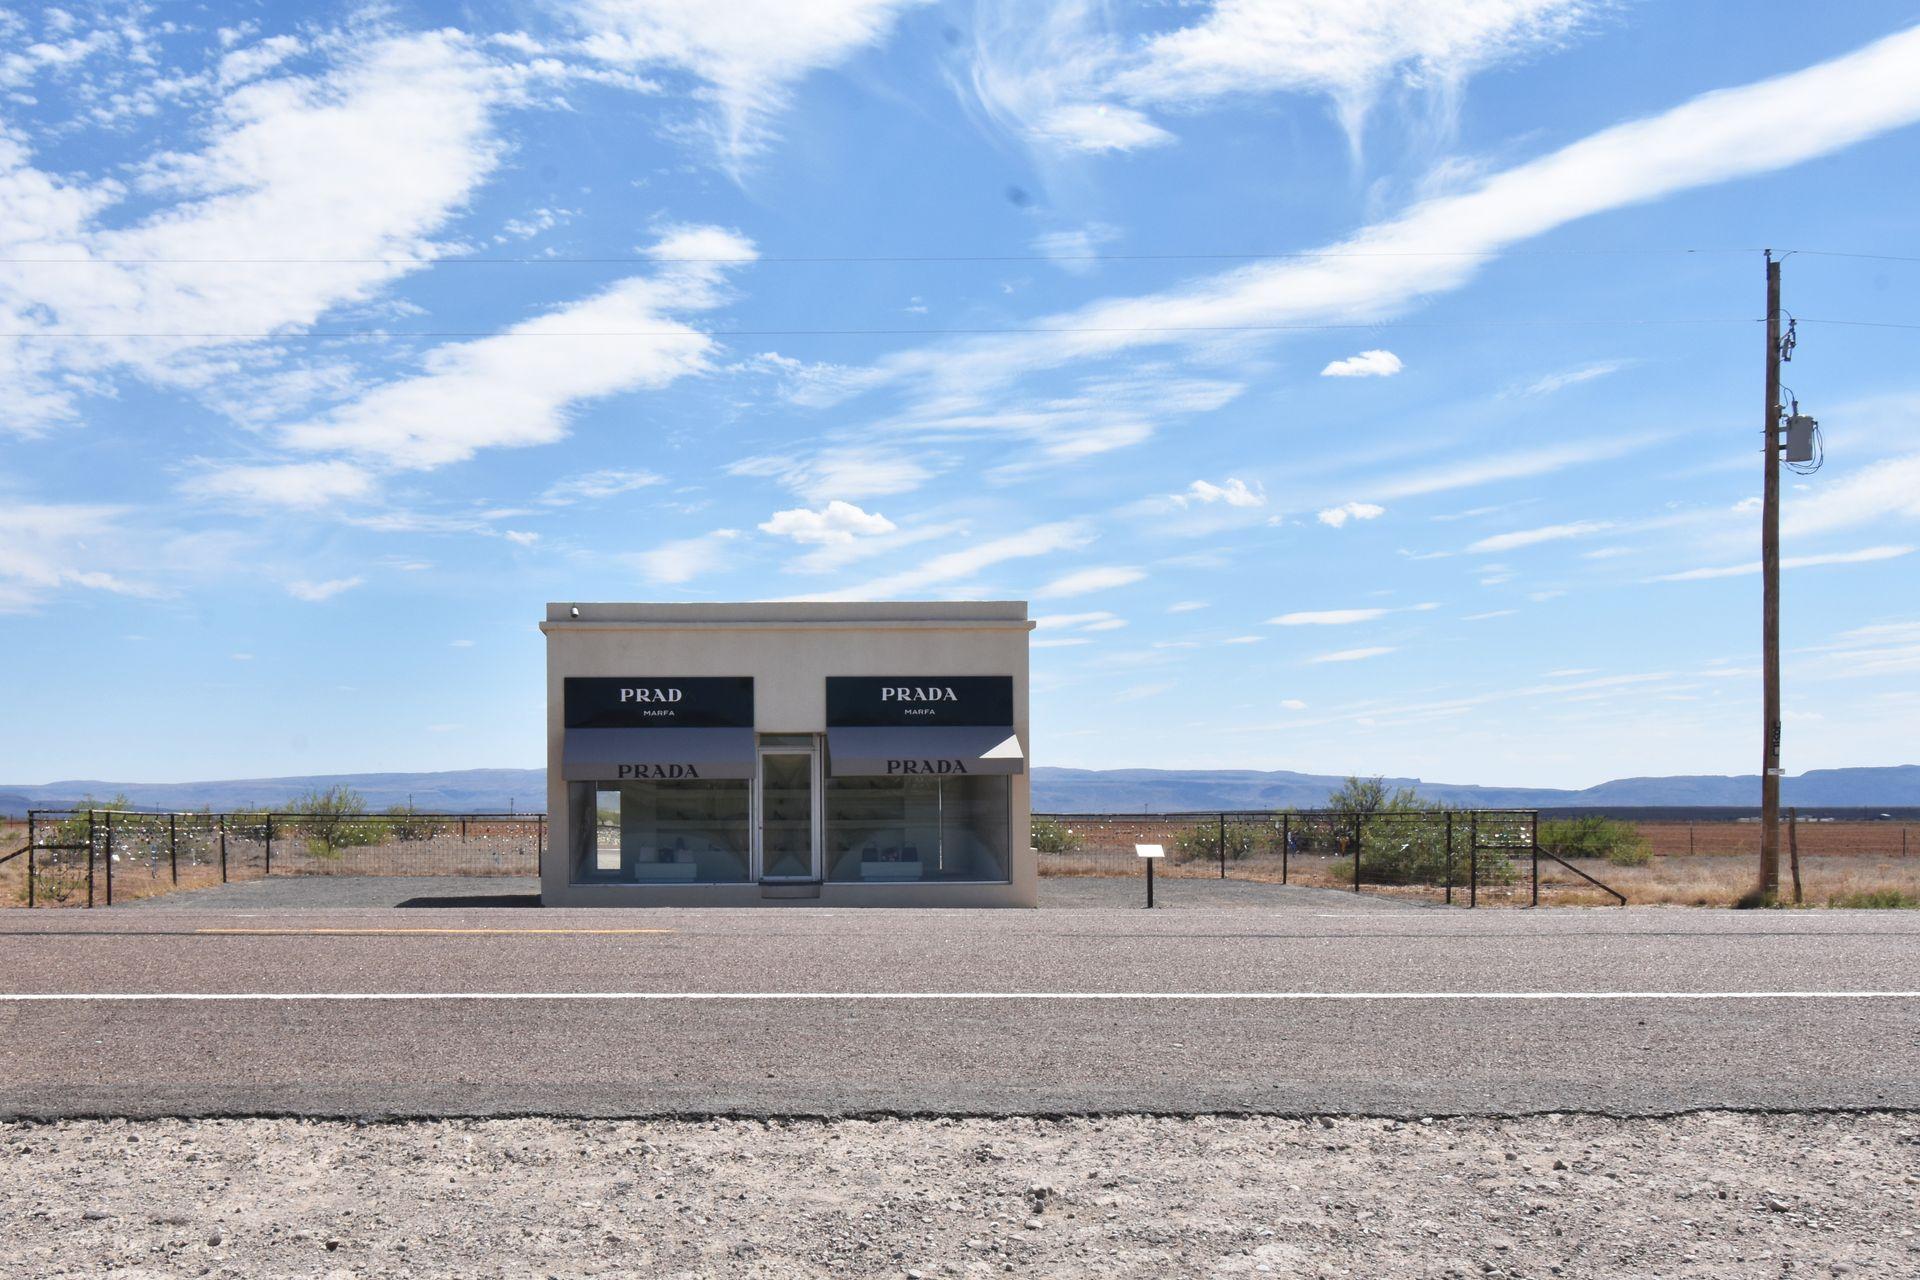 Looking across the street at Prada Marfa with an expansive desert in the background.